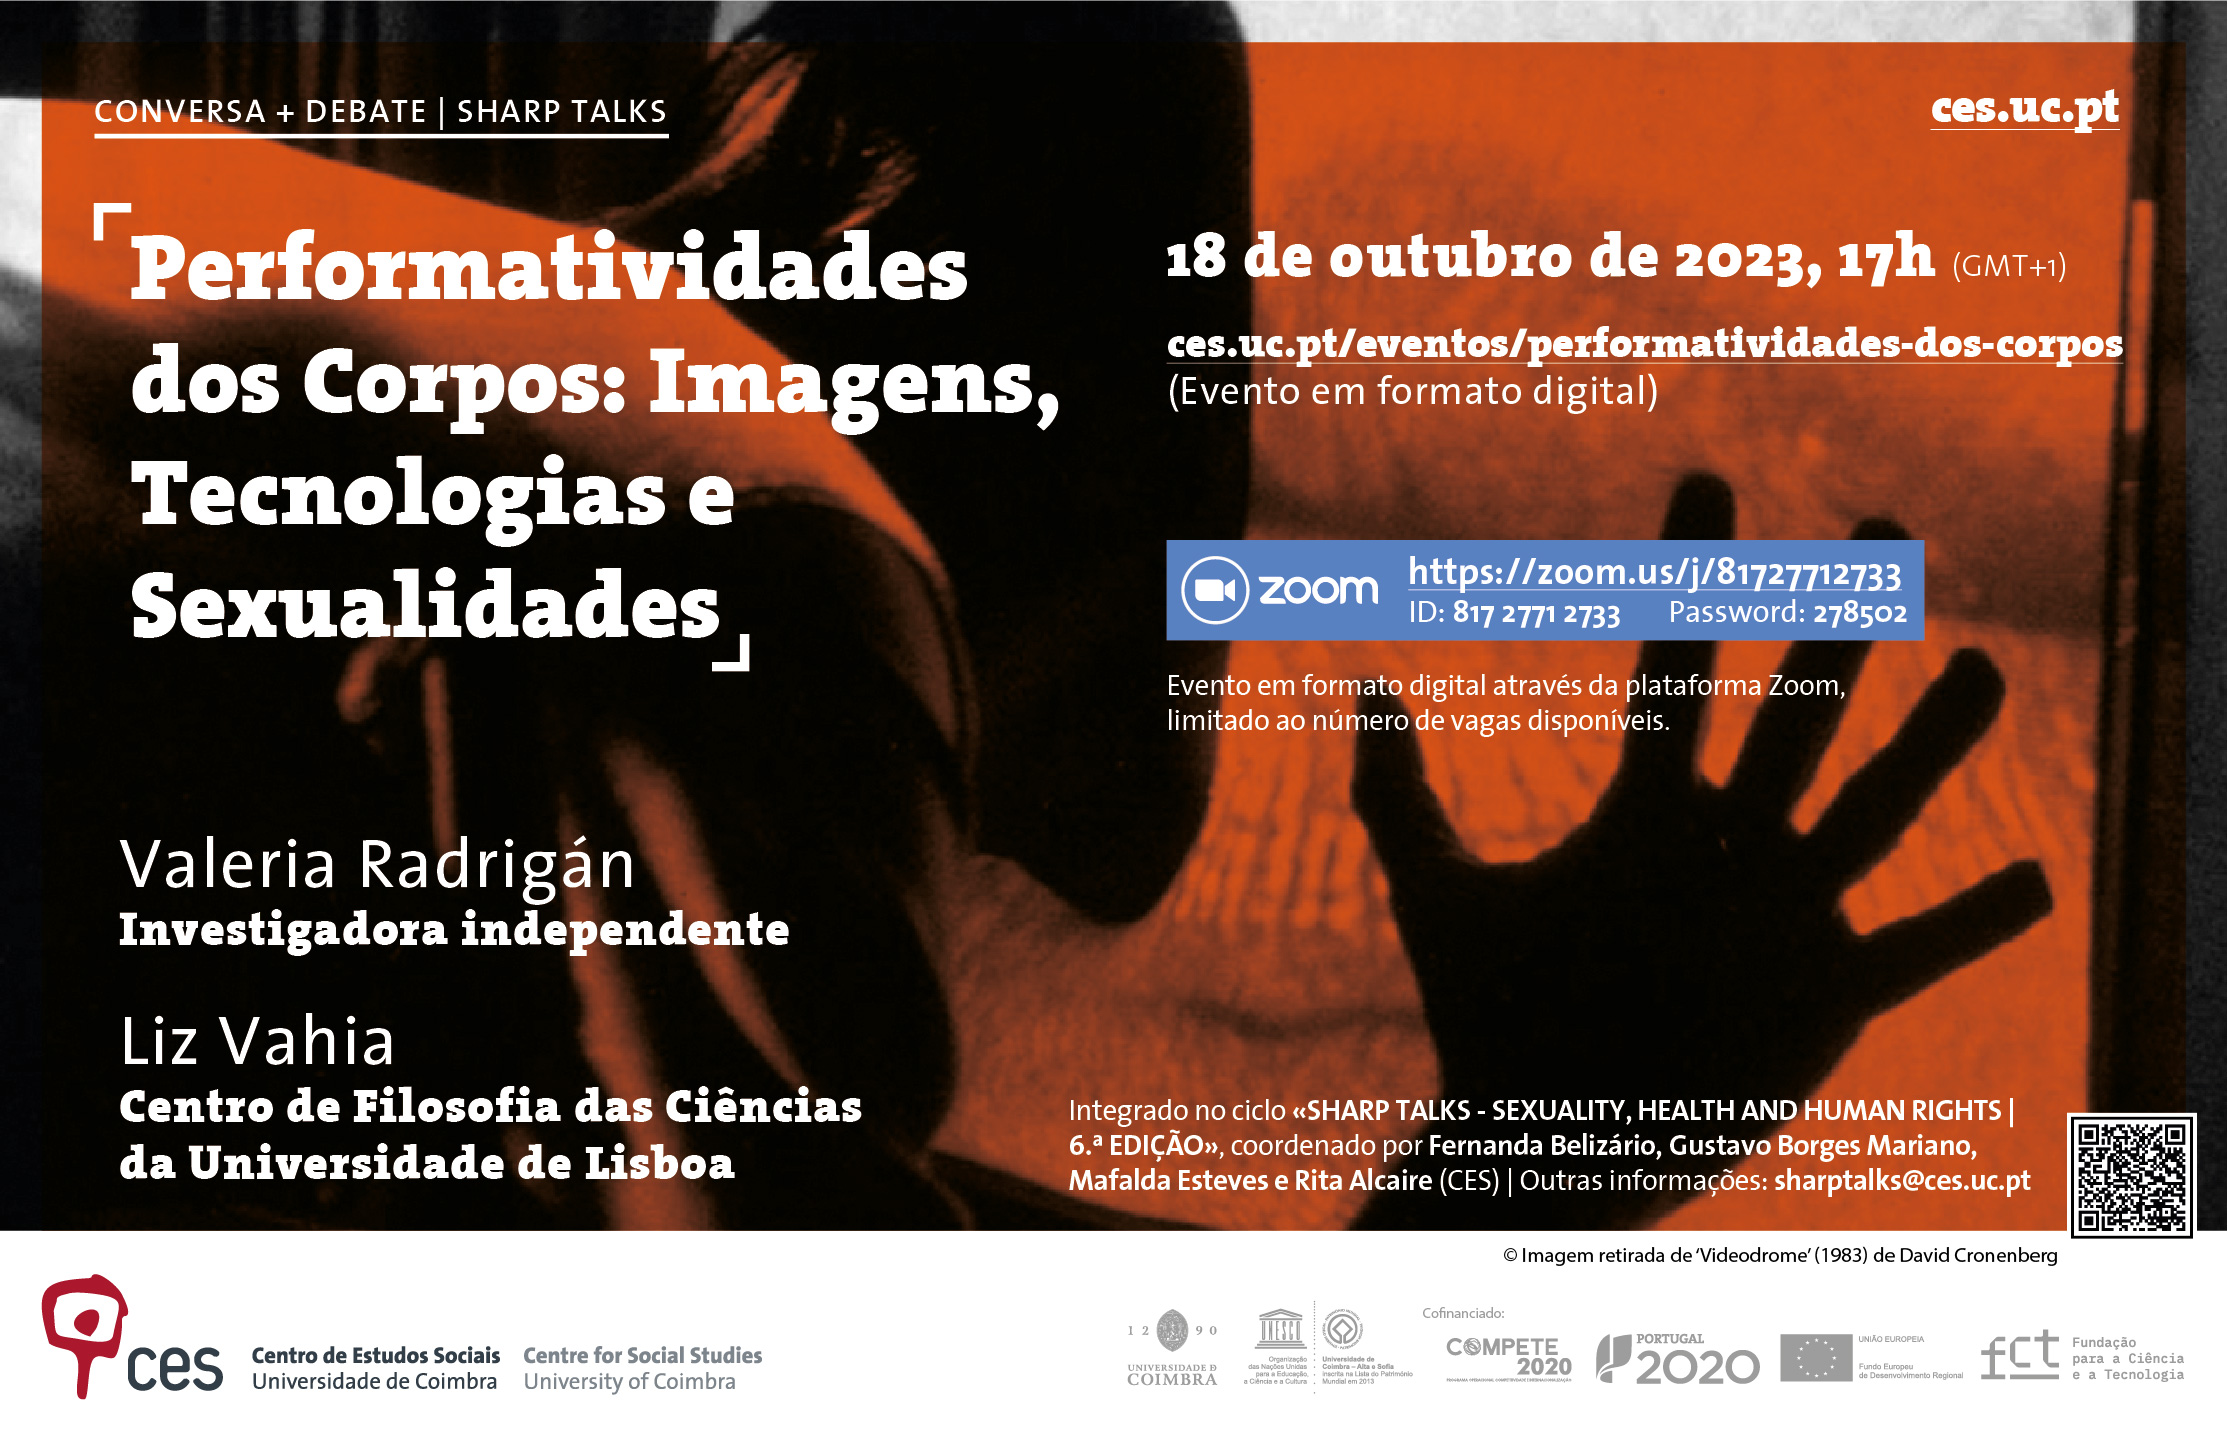 Performativities of Bodies: Images, Technologies and Sexualities <span id="edit_42545"><script>$(function() { $('#edit_42545').load( "/myces/user/editobj.php?tipo=evento&id=42545" ); });</script></span>